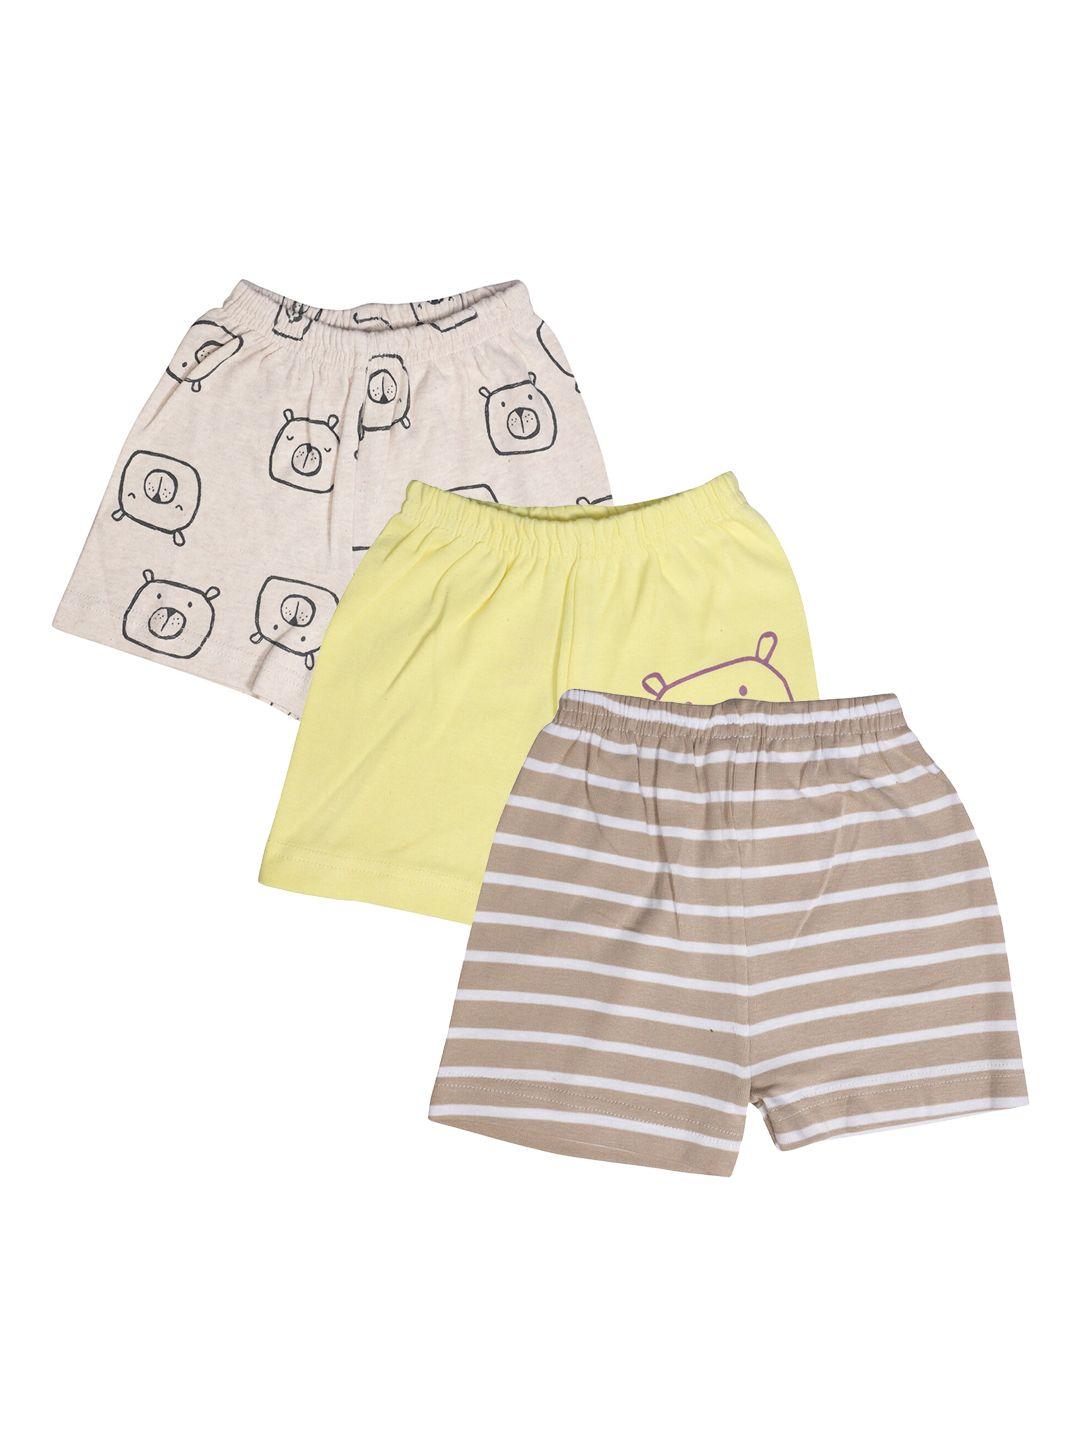 rikidoos boys pack of 3 striped shorts